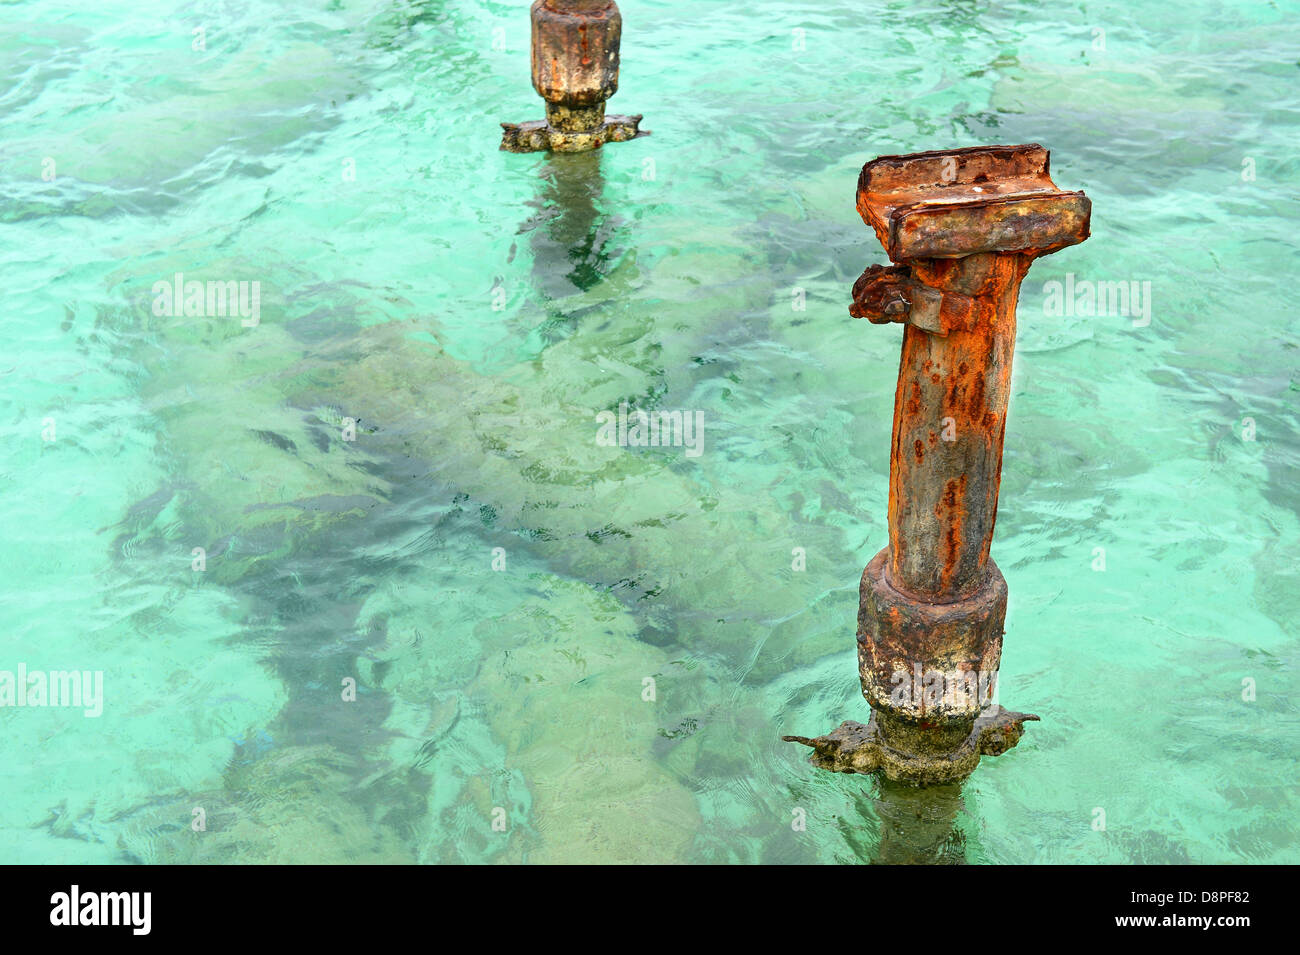 Rusted metal posts from pier in clear Caribbean waters Stock Photo